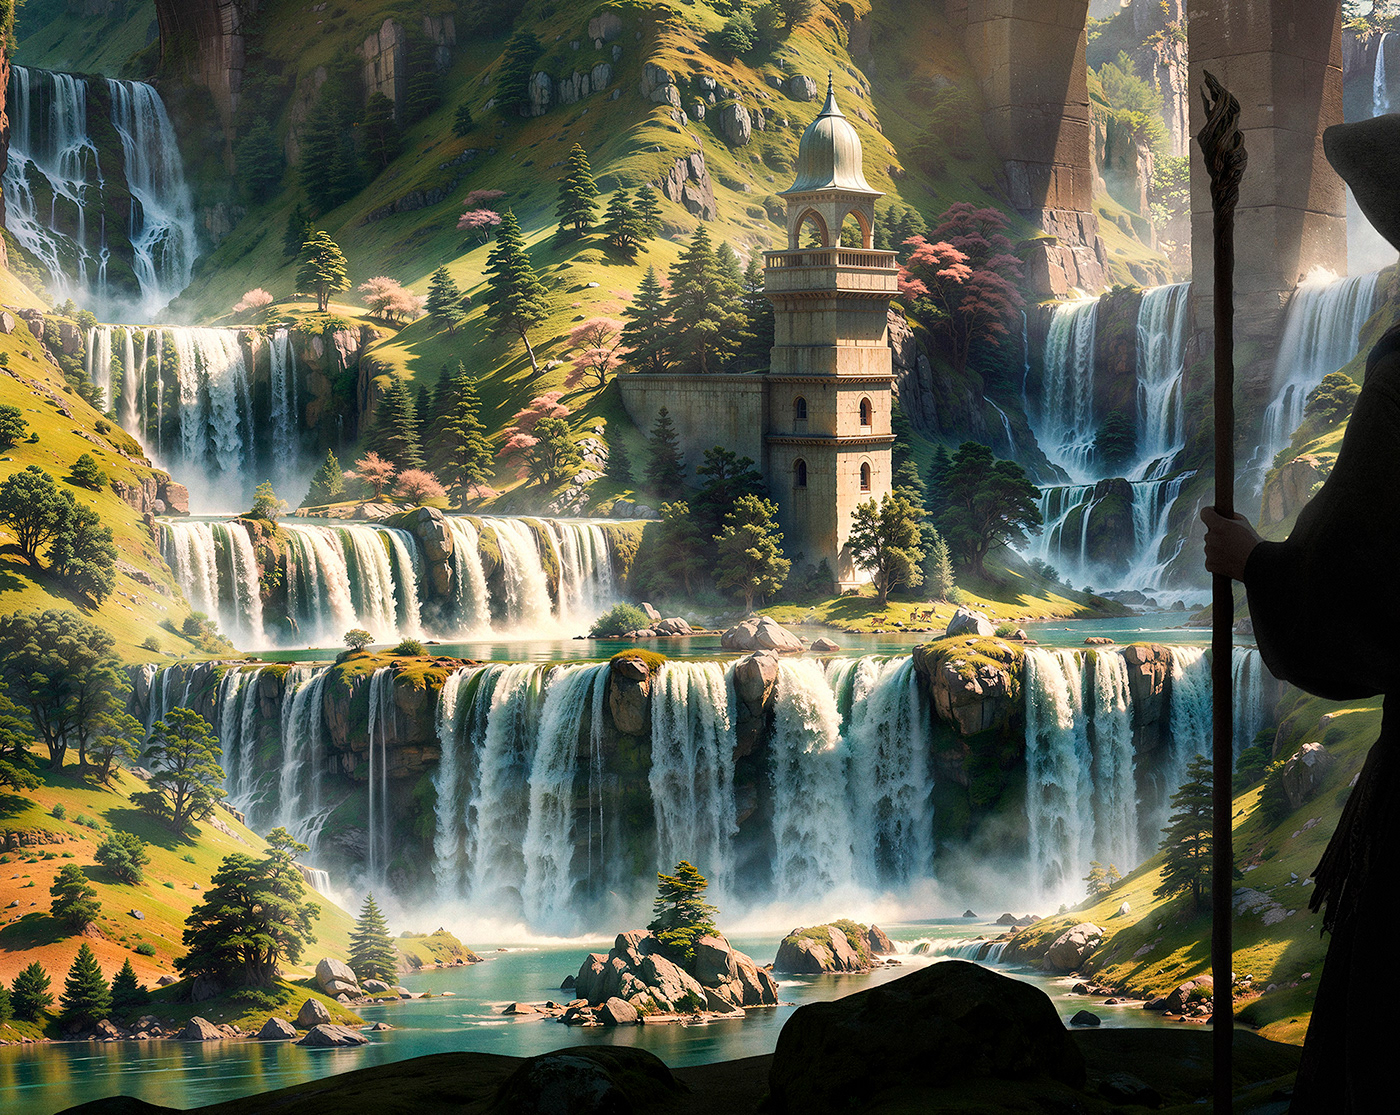 Lord of the rings the Hobbit gandalf wizard fantasy ruins abandoned Waterfalls Tolkien elves